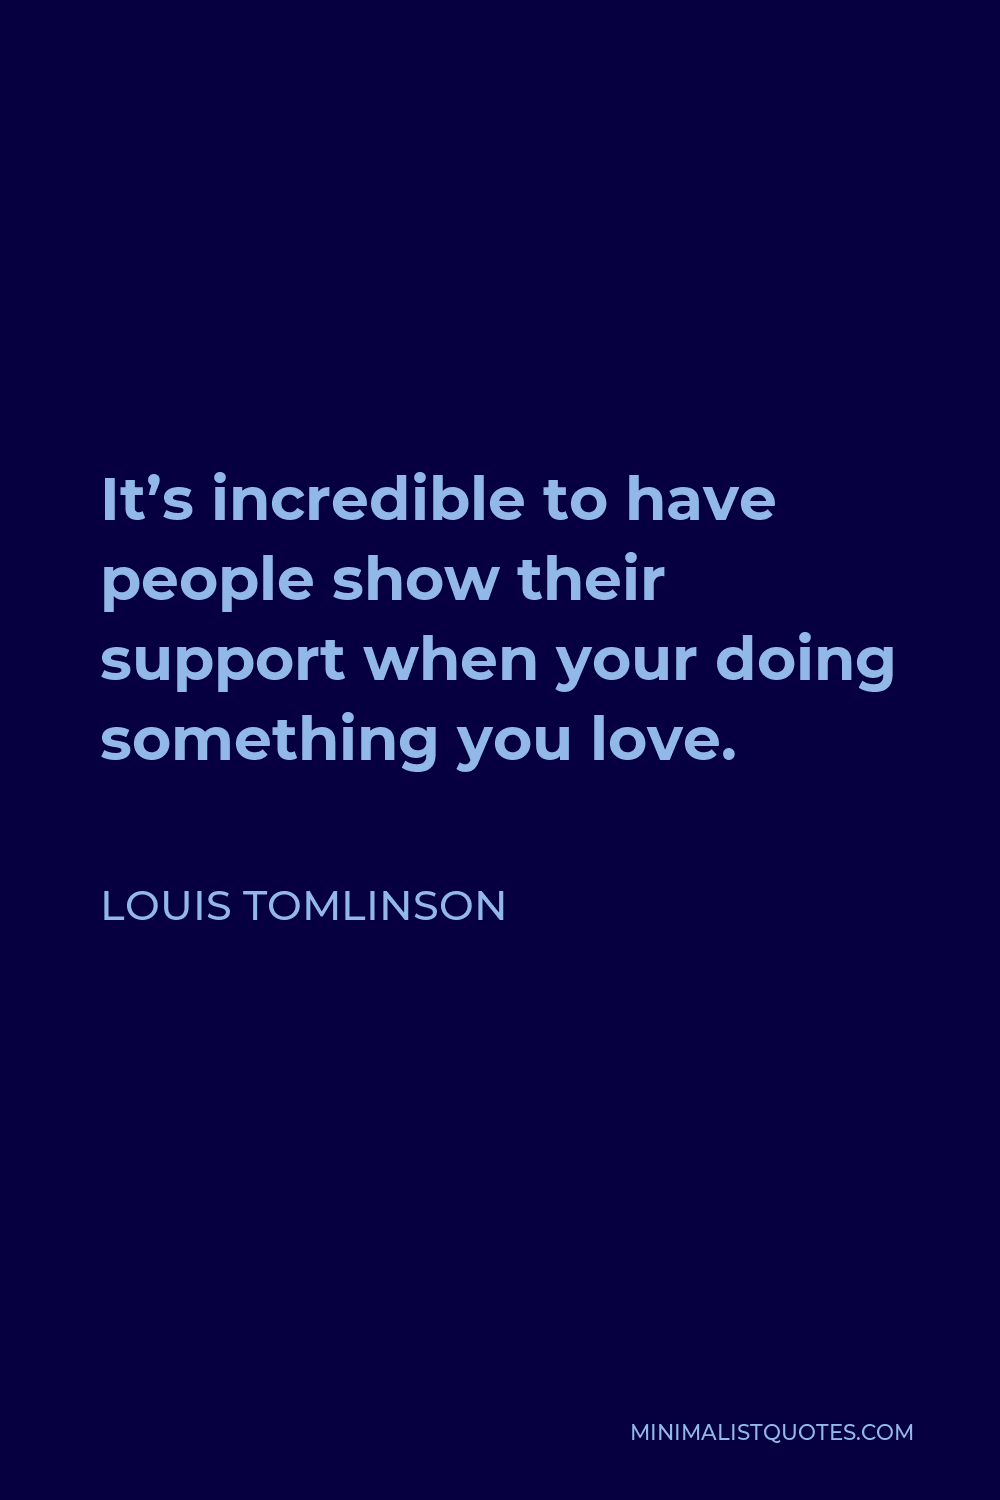 Louis Tomlinson Quote - It’s incredible to have people show their support when your doing something you love.